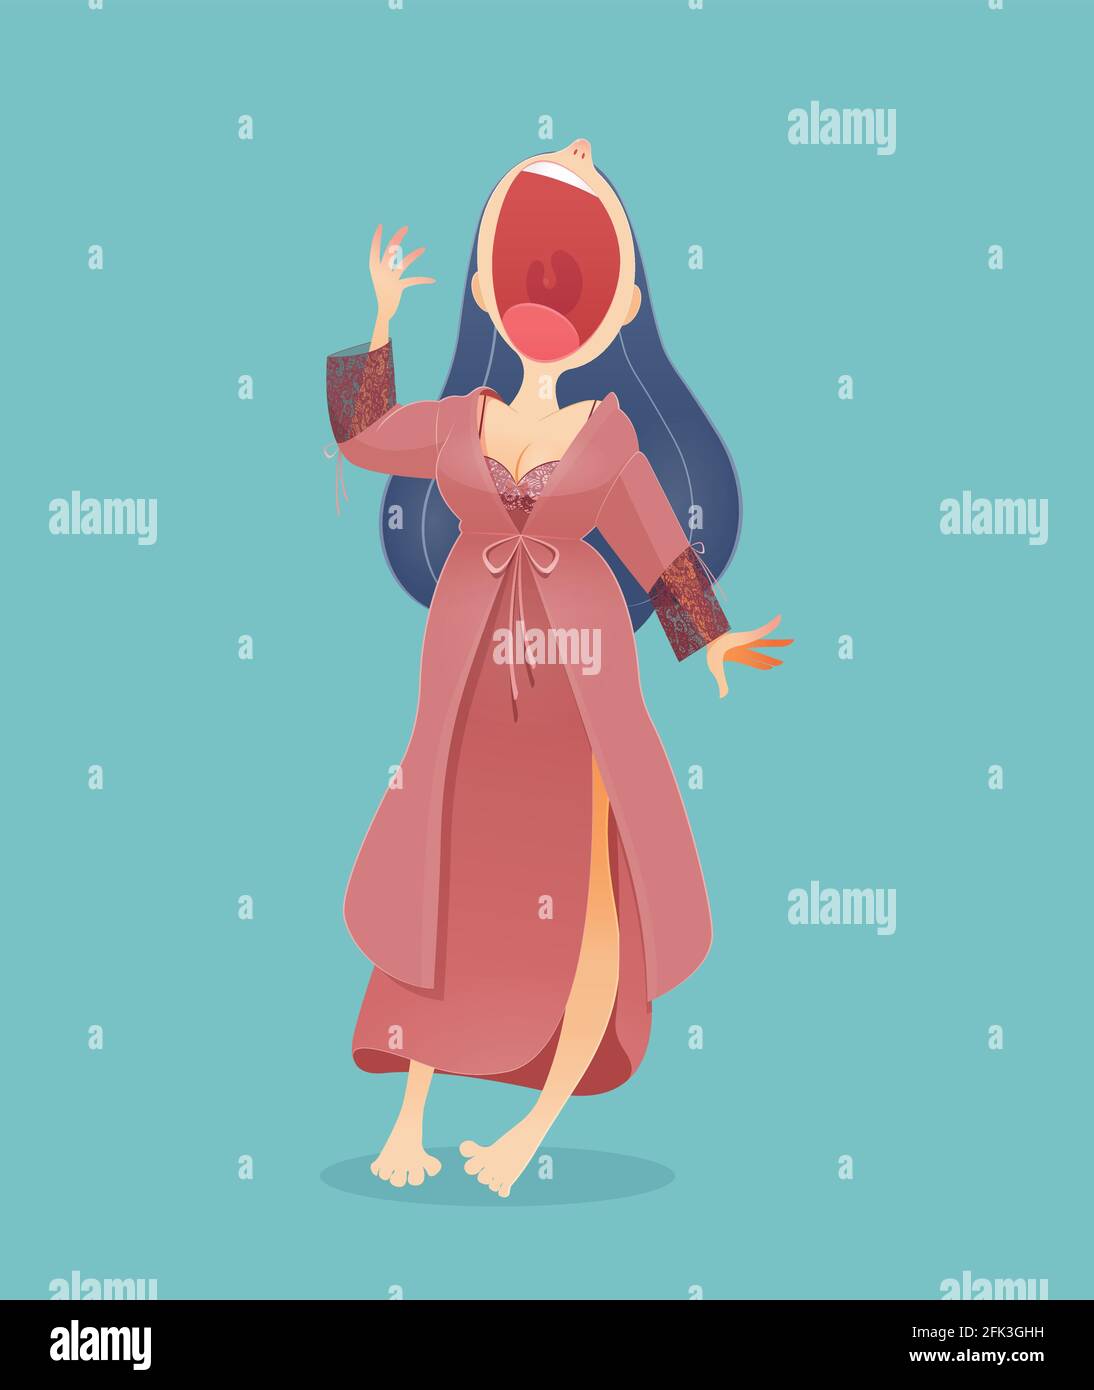 Cartoon woman in nightwear and robe standing yawn against blue background, Vector Cartoon Stock Vector